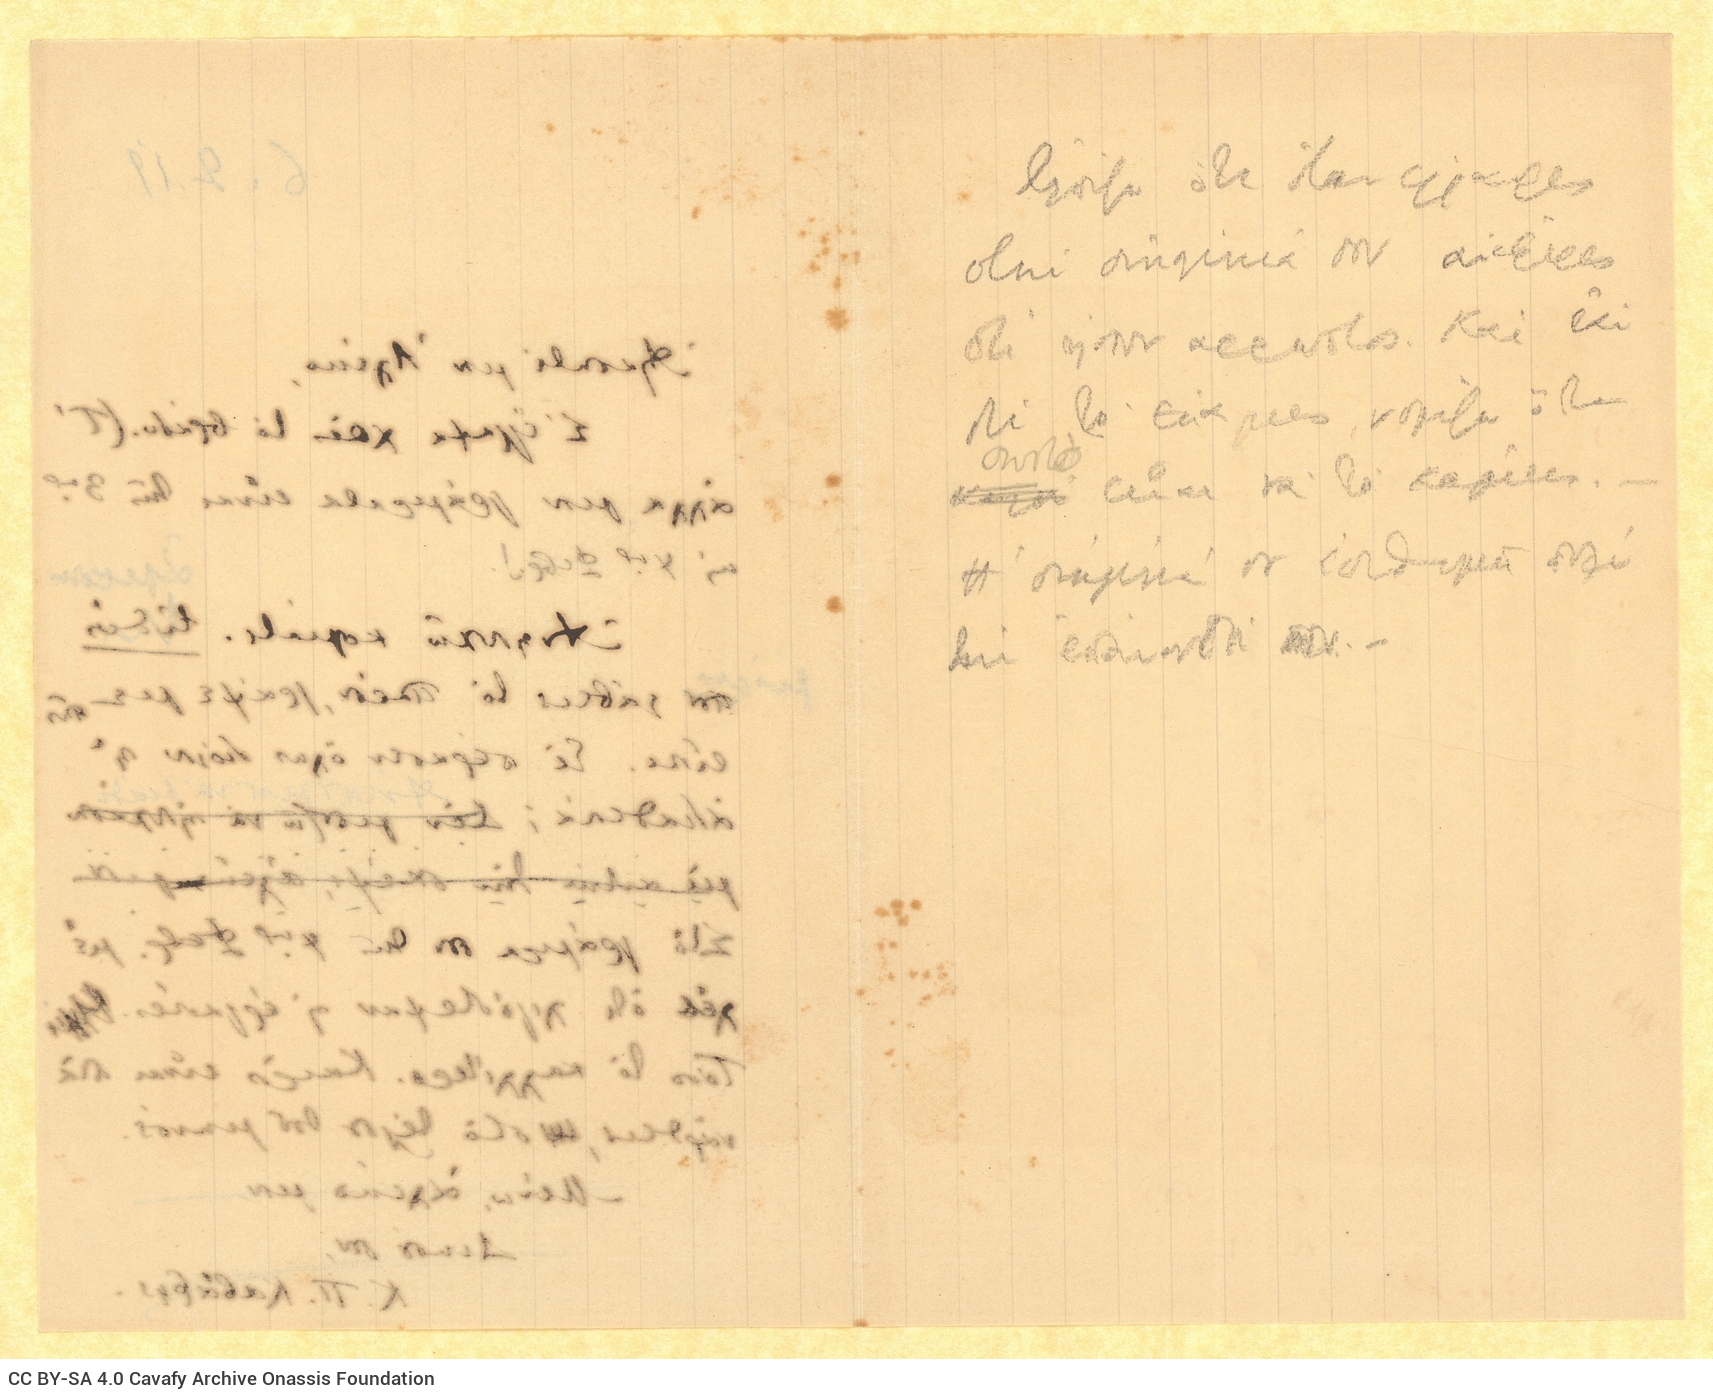 Handwritten signed draft letter by Cavafy to Alekos [Singopoulo] on both sides of a ruled sheet, folded in a bifolio. The poe